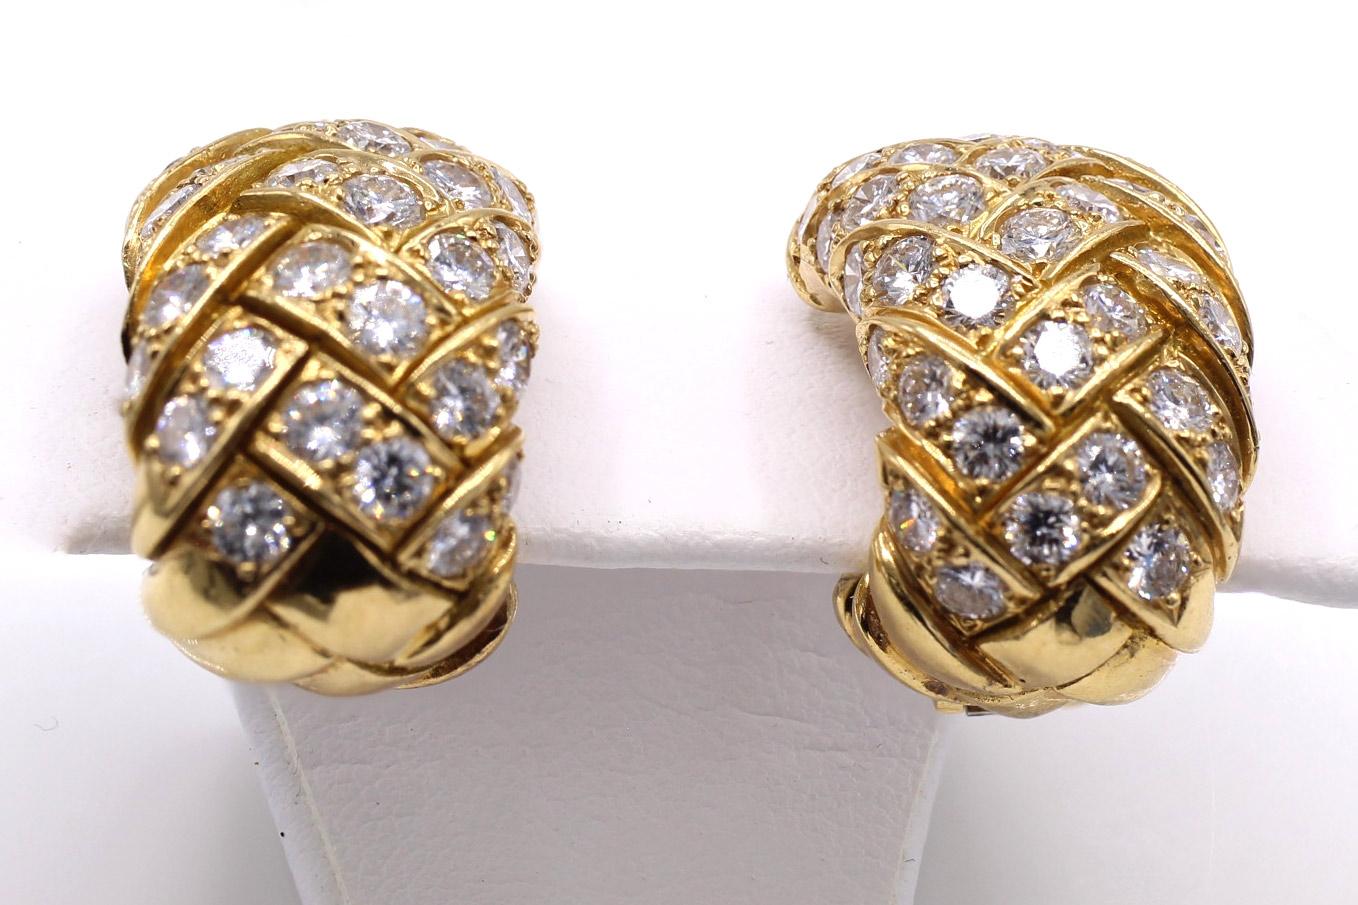 Beautifully designed and masterfully handcrafted in 18 karat yellow gold by Van Cleef & Arpels. The rectangular slightly curved ear clips with a honeycomb design of polished gold bars with sections of perfectly matched bright white round brilliant